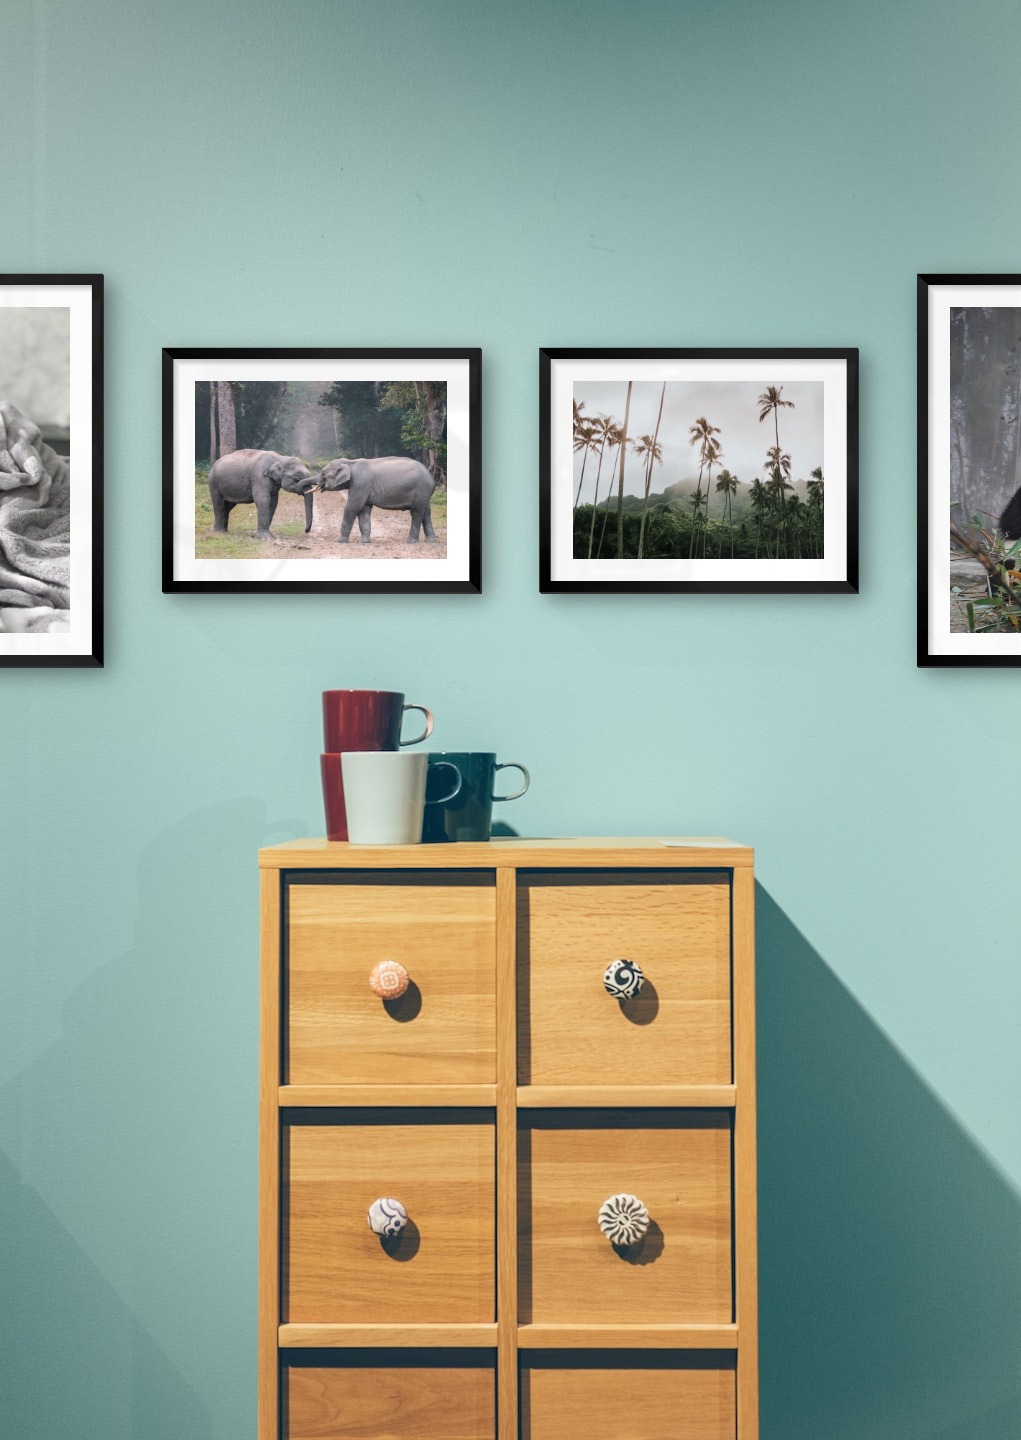 Gallery wall with picture frames in black in sizes 40x50 and 30x40 with prints "Cat in felt", "Elephants", "Palm trees and mountains" and "Panda"